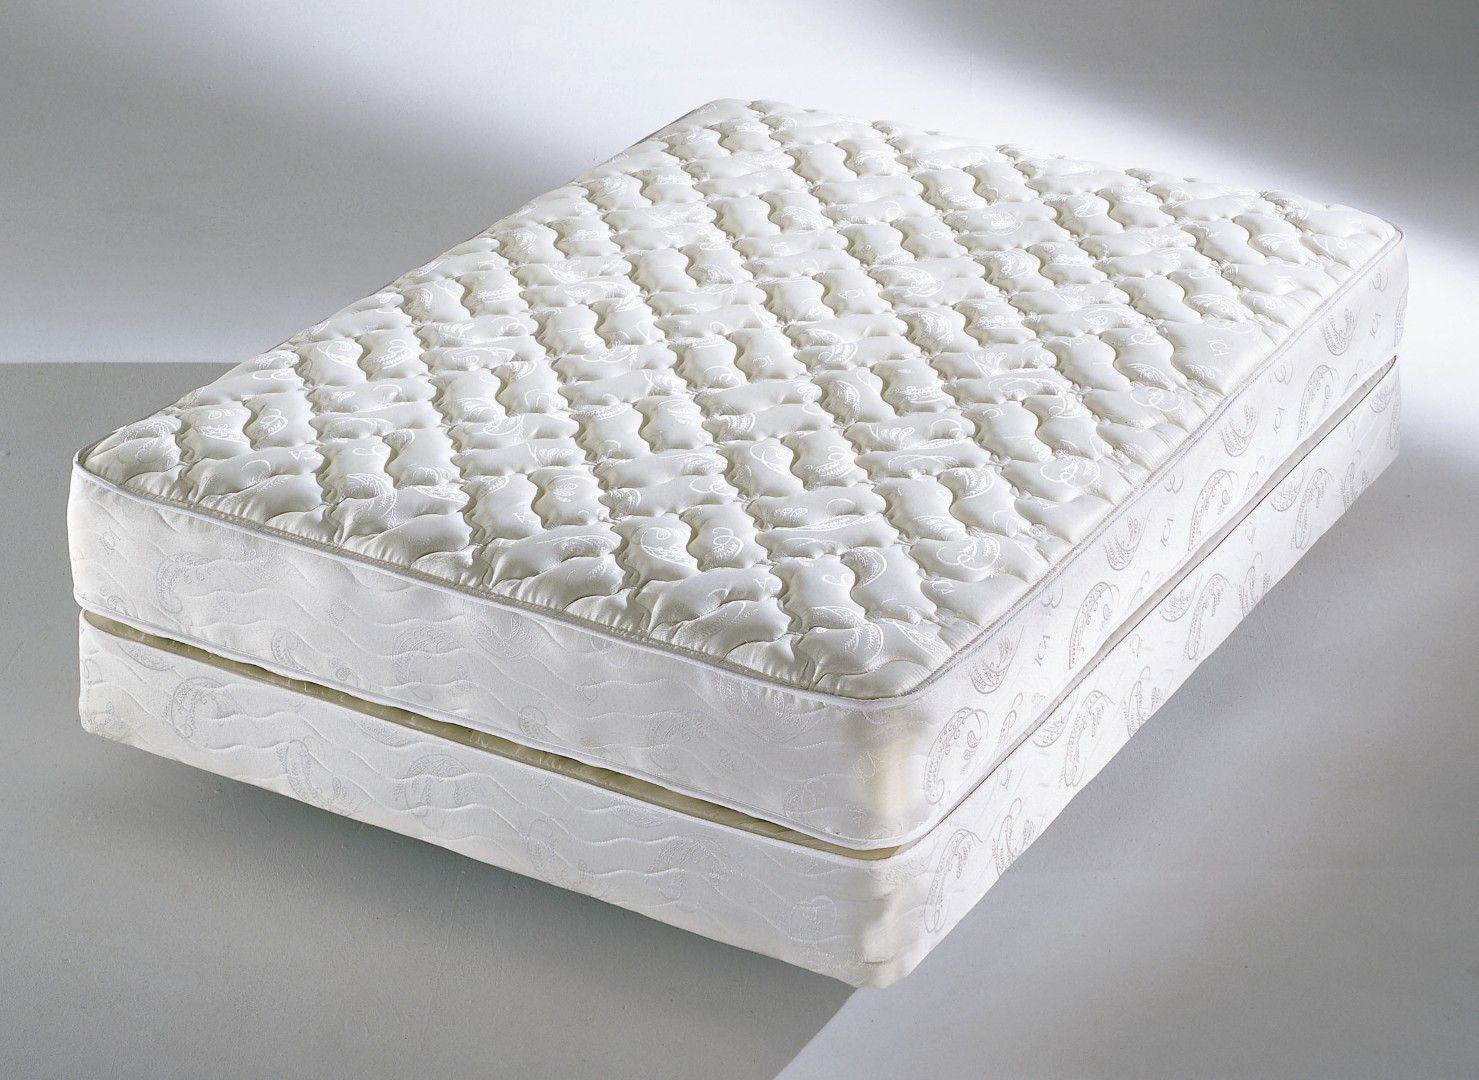 Sleep Like Royalty: King-Size Spring Mattresses for Sale